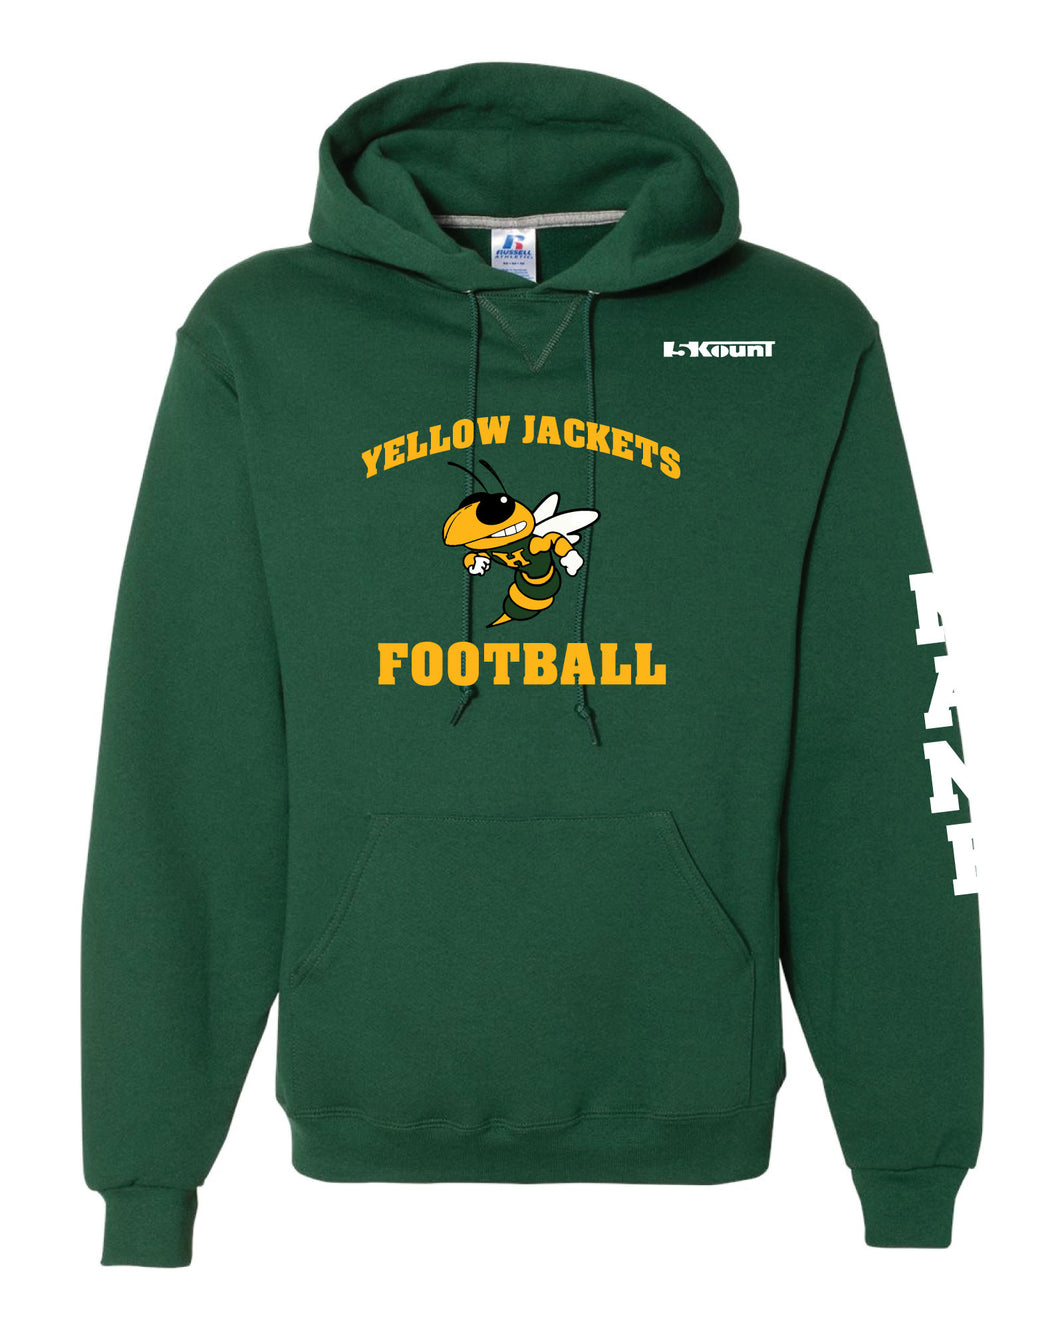 Yellow Jackets Football Russell Athletic Cotton Hoodie - Forest Green - 5KounT2018